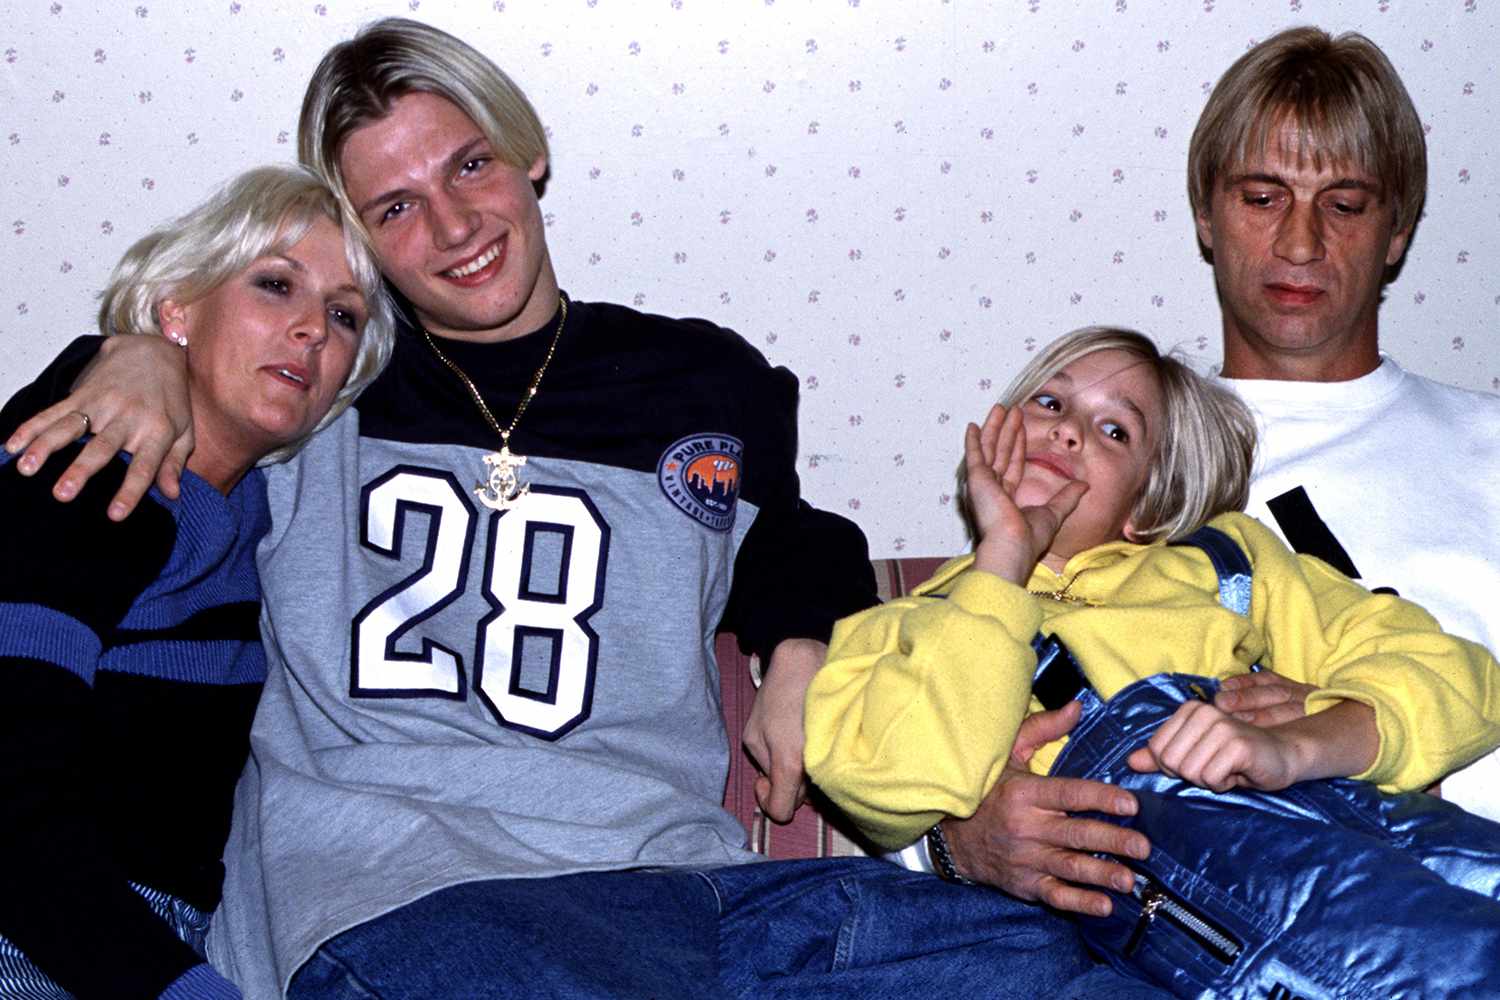 Nick and Aaron Carter's Friend Reveals How Mom Jane Tried to 'Divide' Her Sons After Leslie's Death: 'He Doesn't Love You'